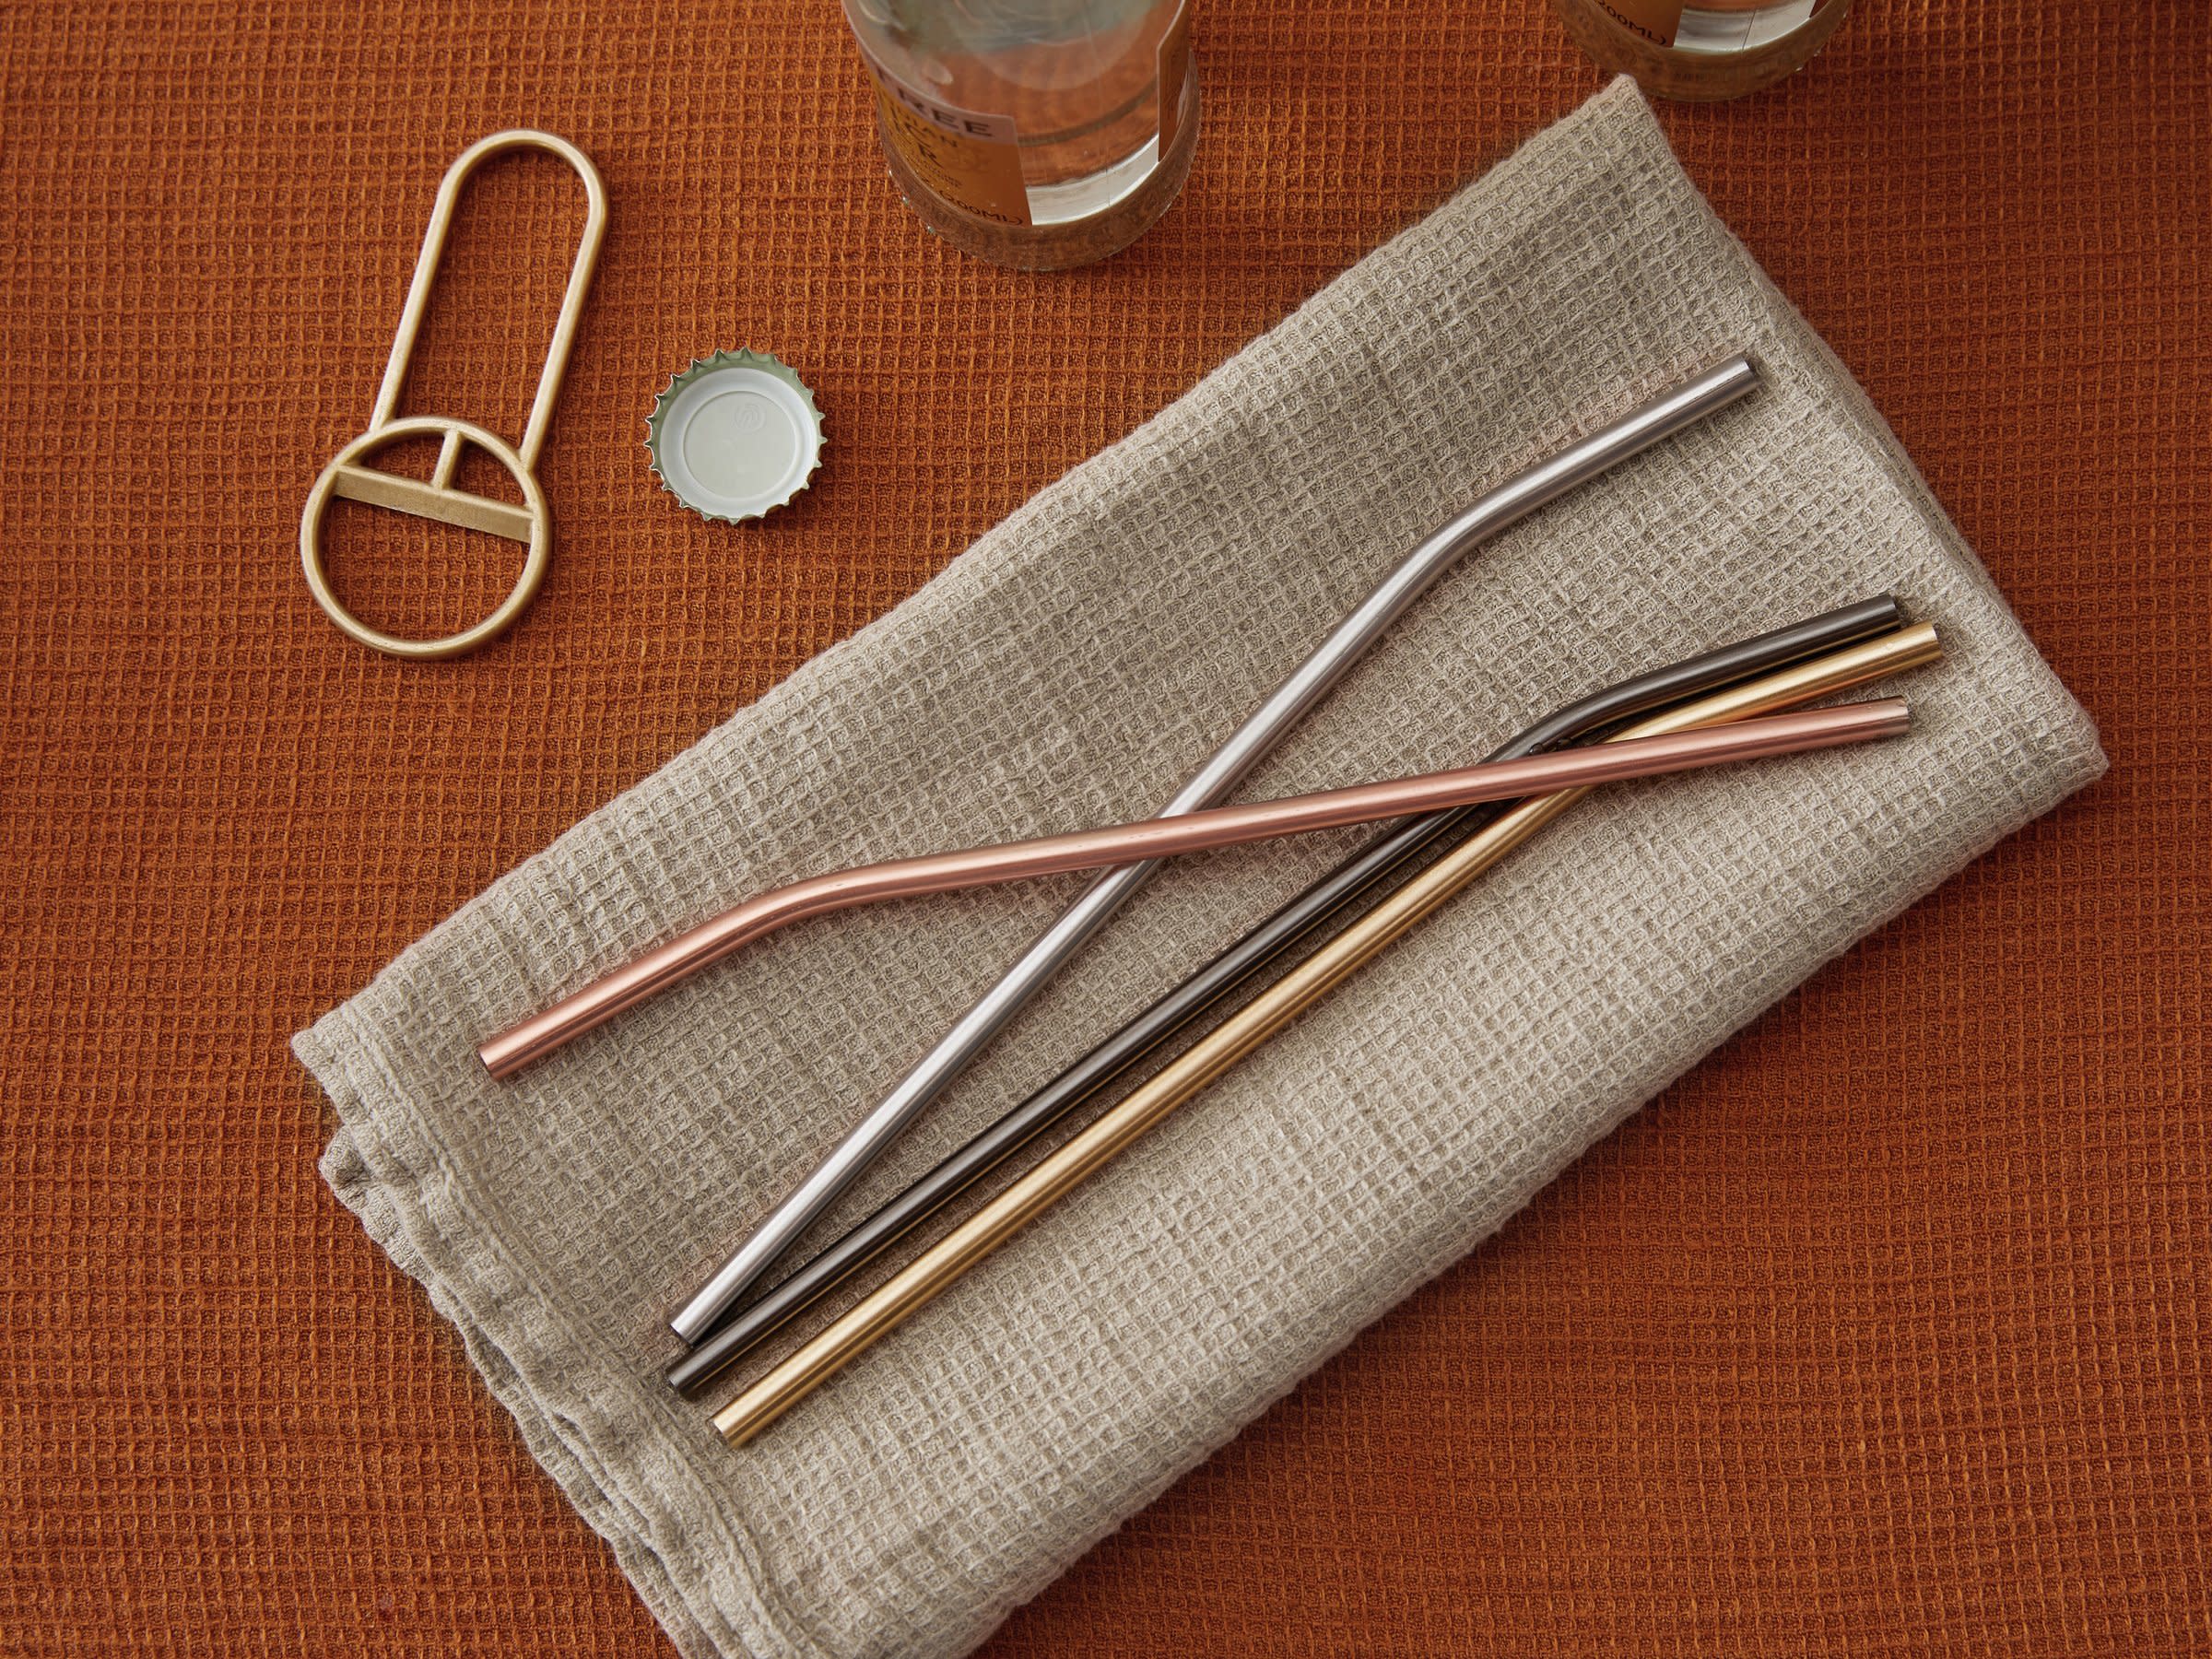 Matte Metallic Stainless Bent Straws Shown In A Room